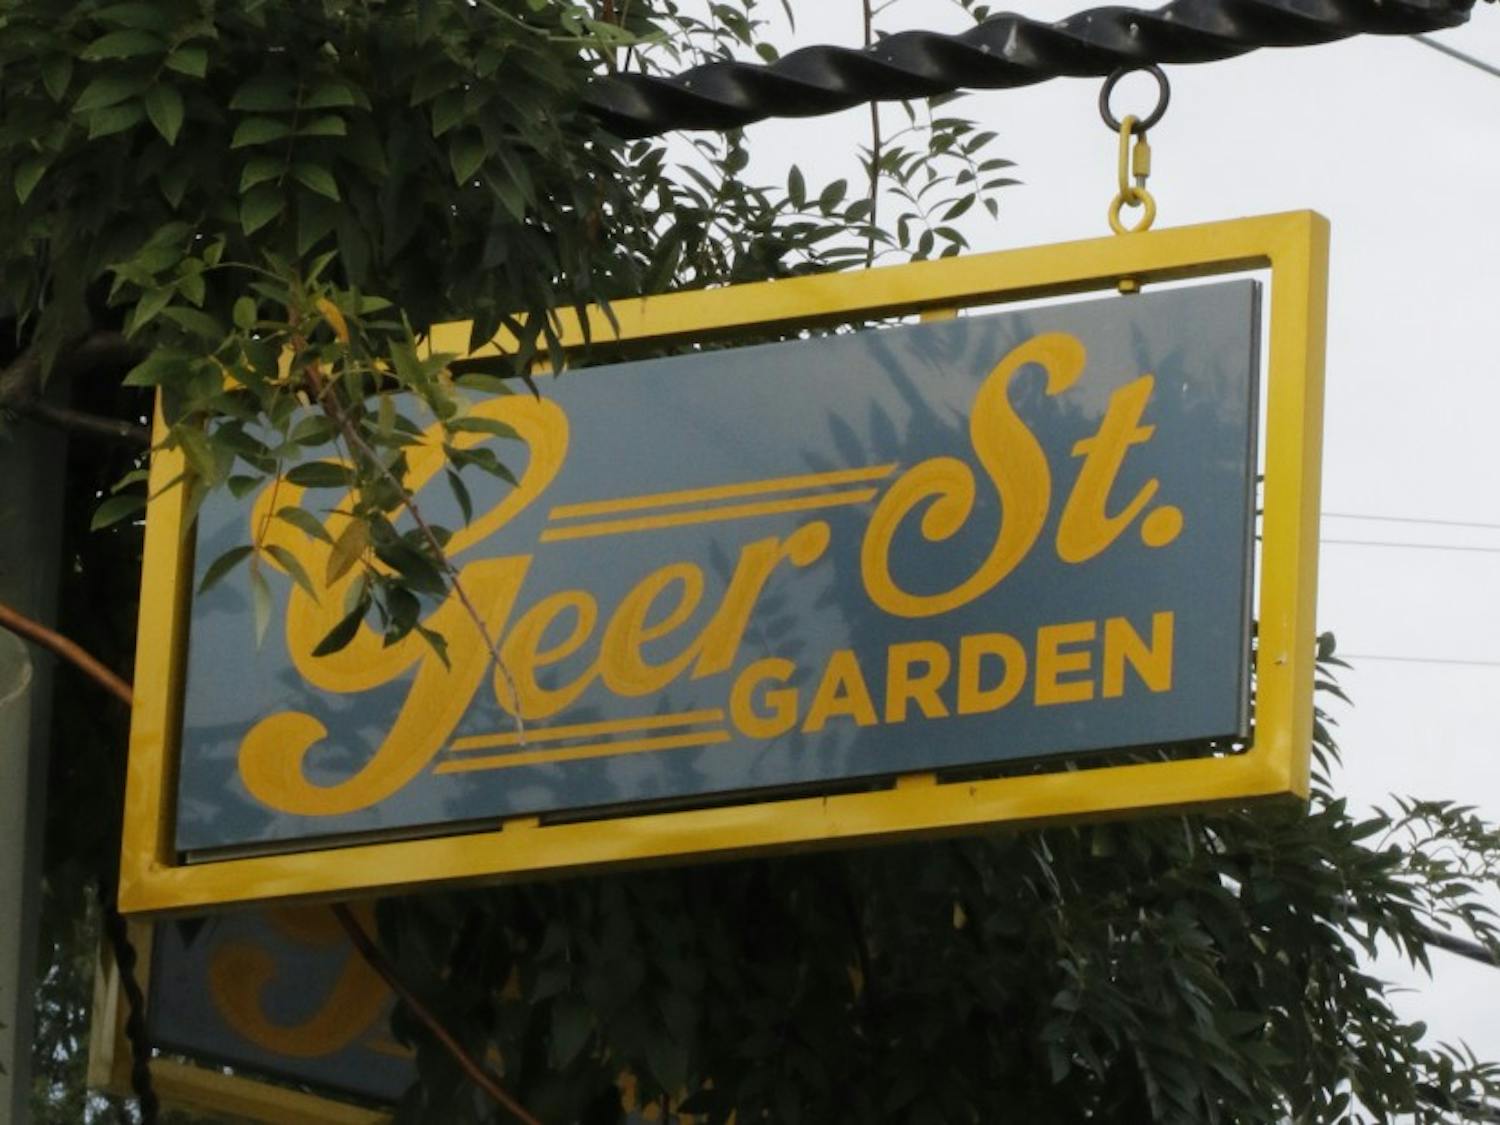 Geer Street Garden is one of Durham’s most popular bars and restaurants. Its inclusion in the new West Union continues a trend of Duke bringing in popular Durham eateries.